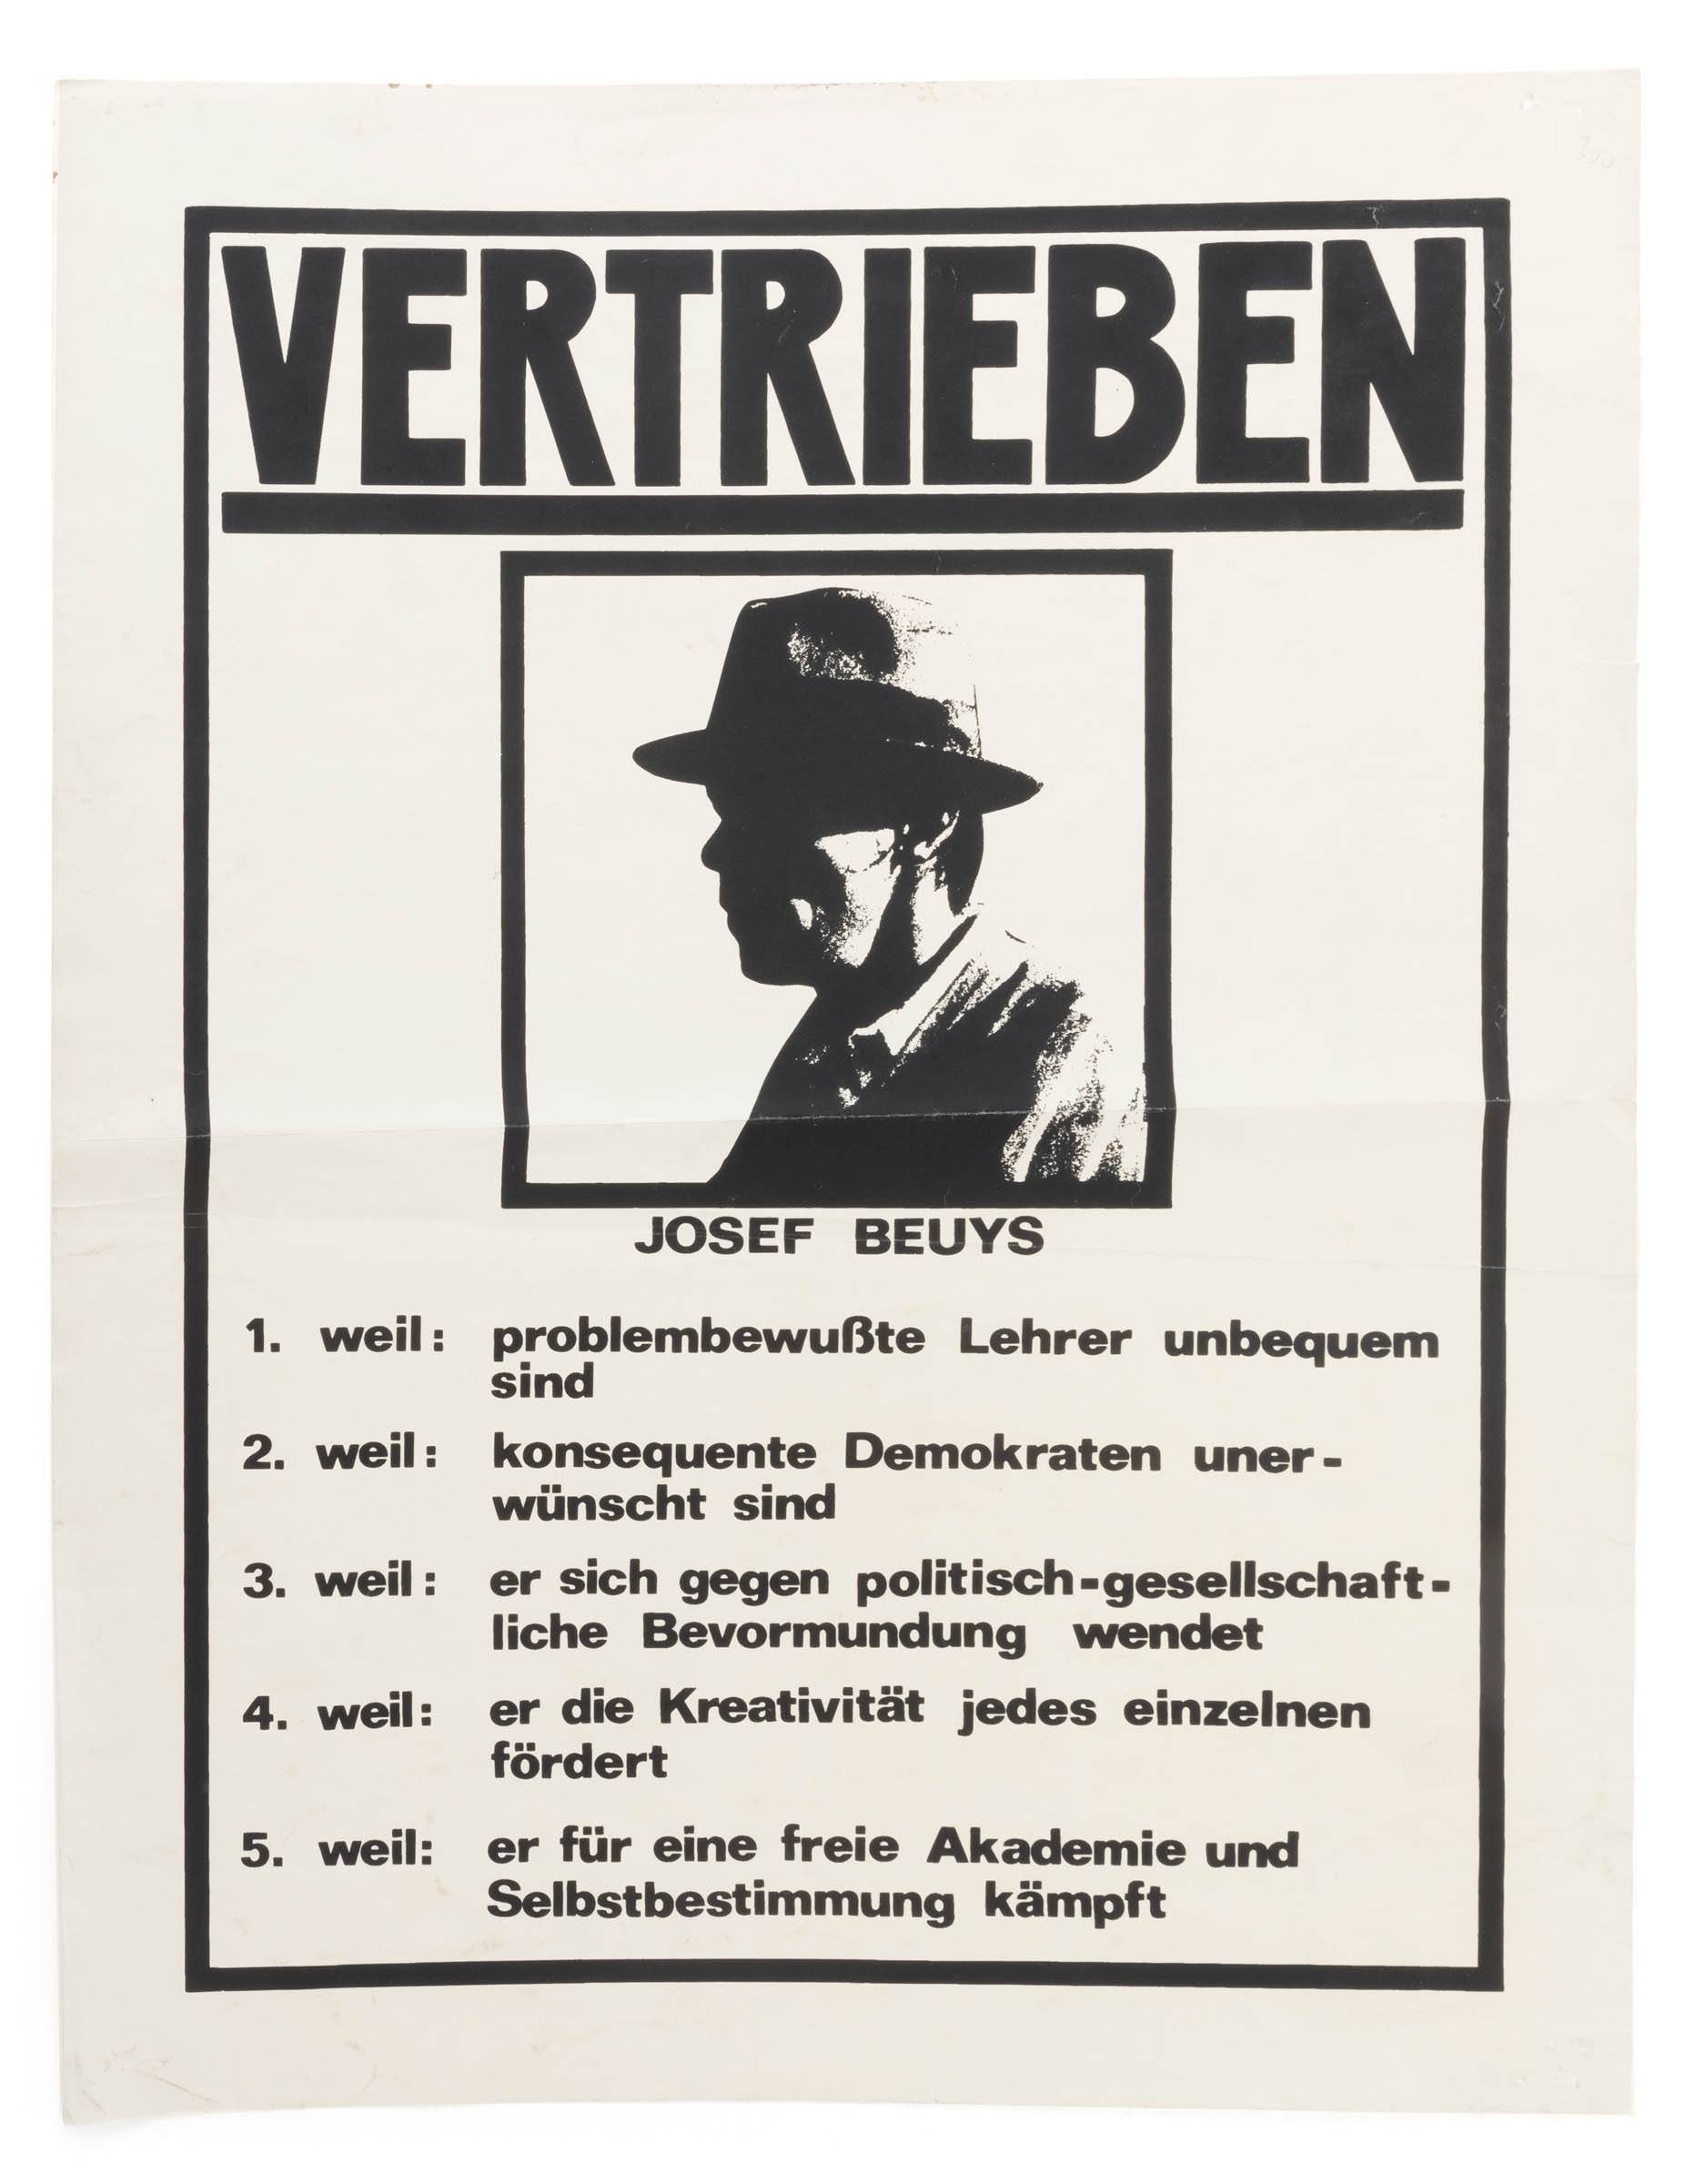 Artwork by Joseph Beuys, 'Vertrieben', Made of Poster